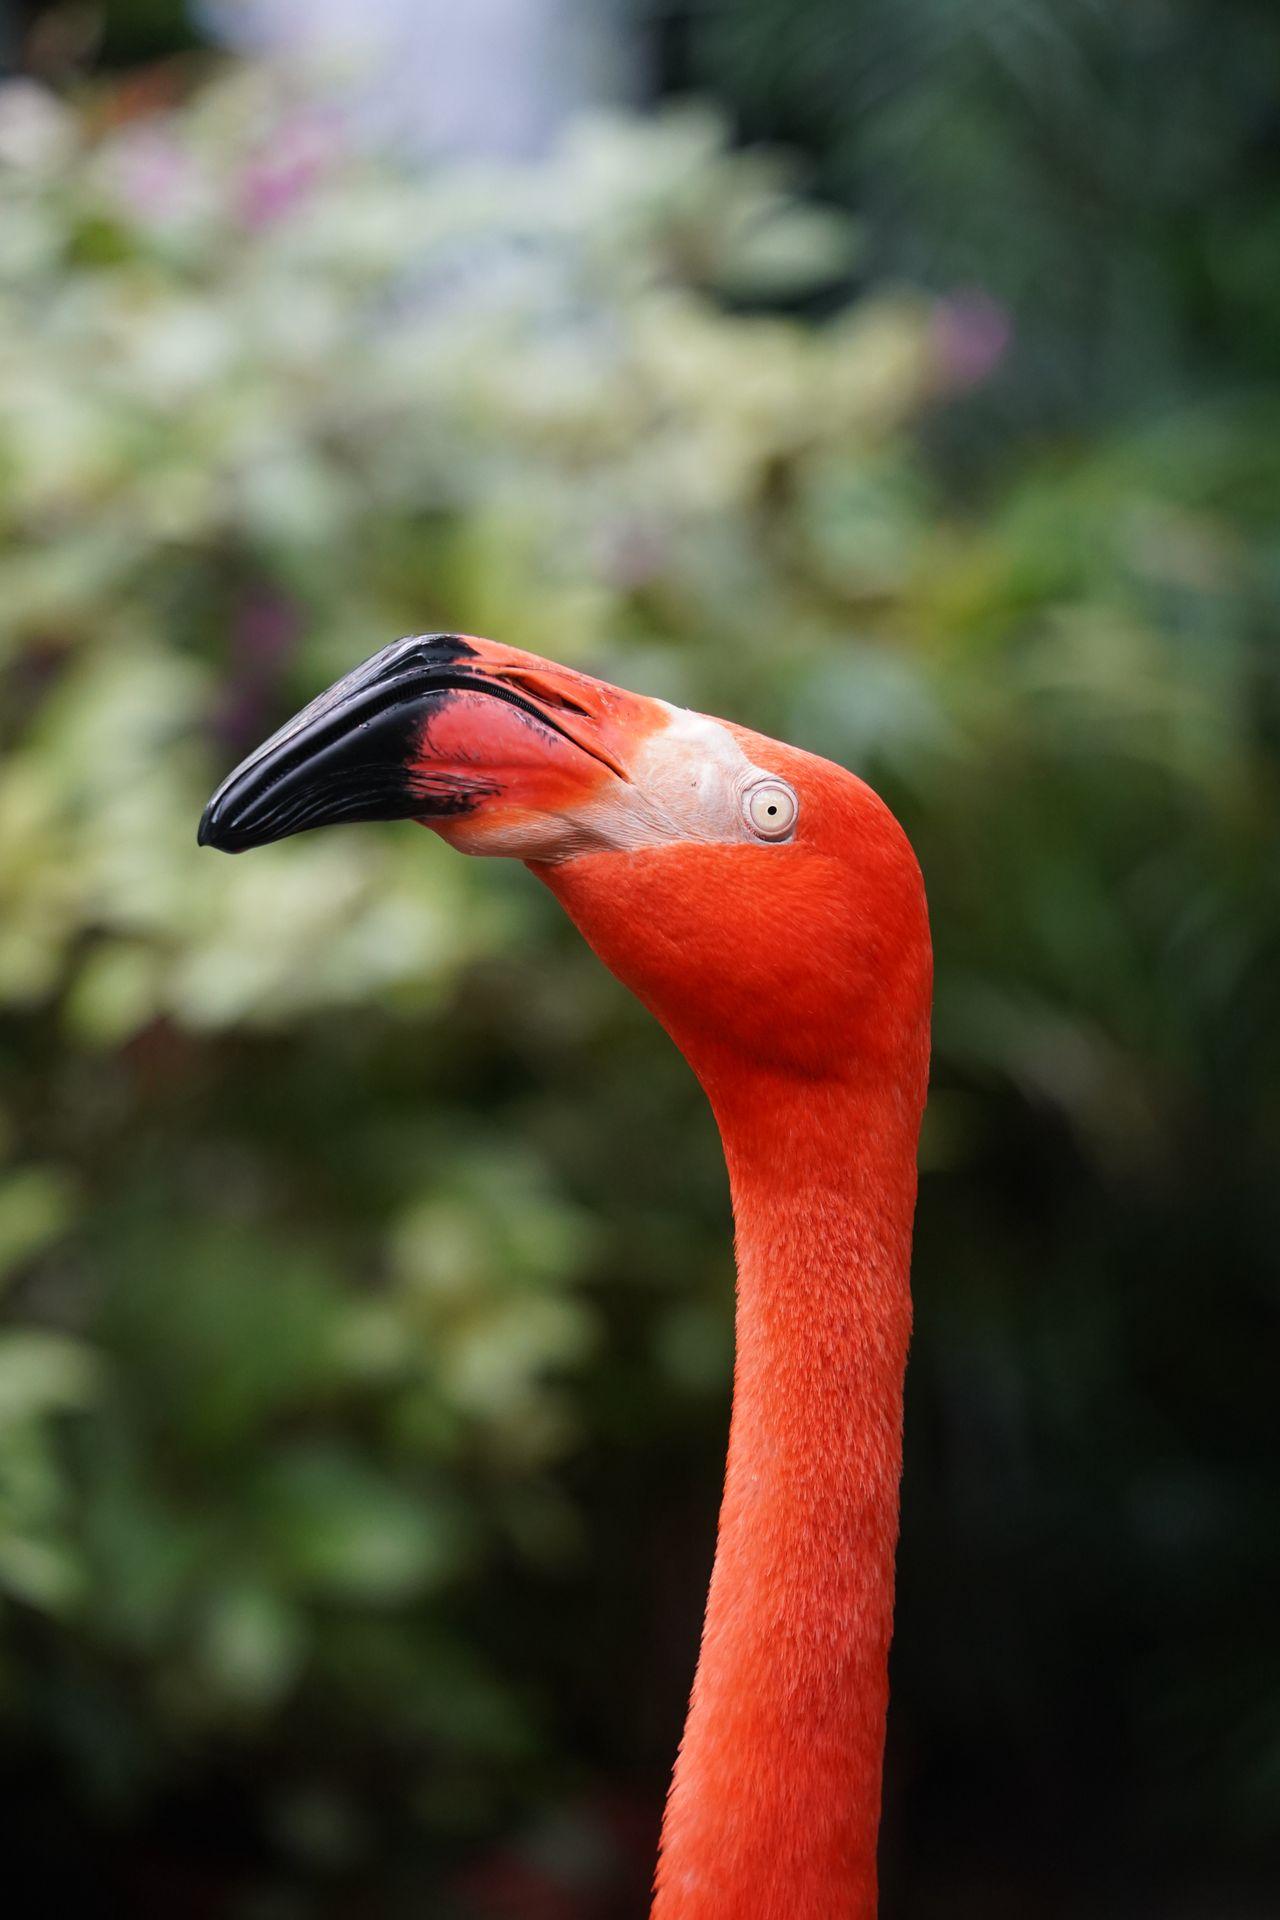 A close up flamingo head with a blurred green background